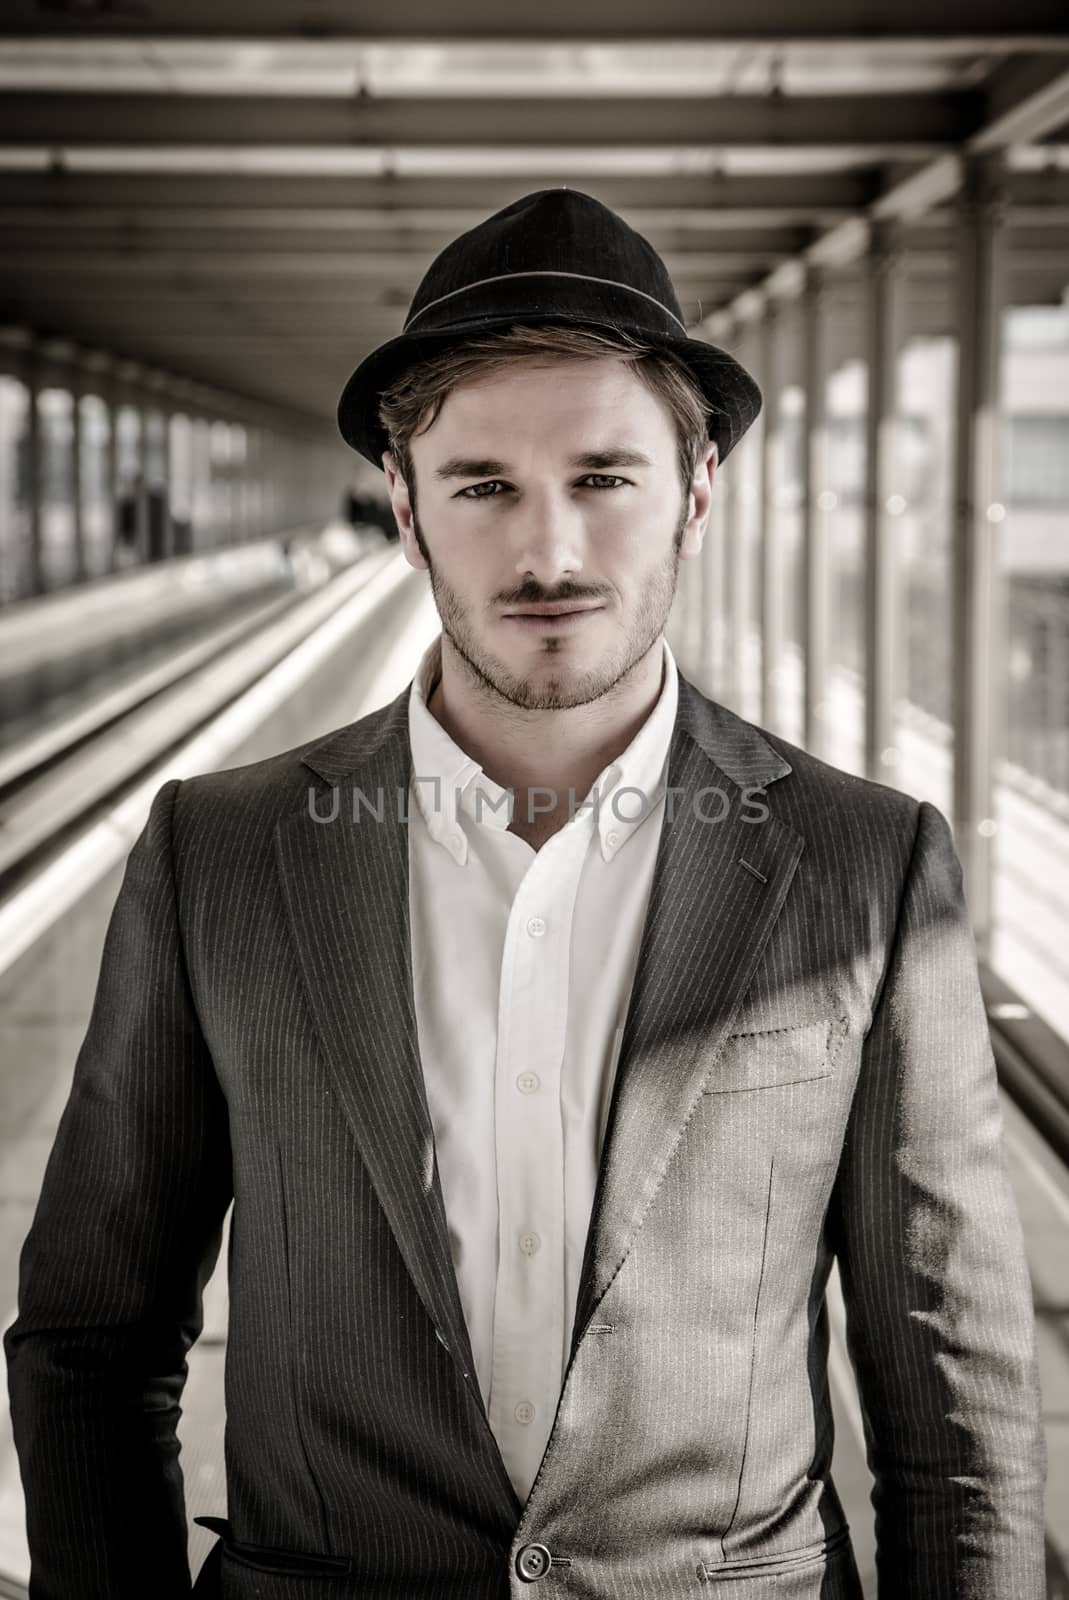 Man Wearing Hat and Looking Out Window by artofphoto